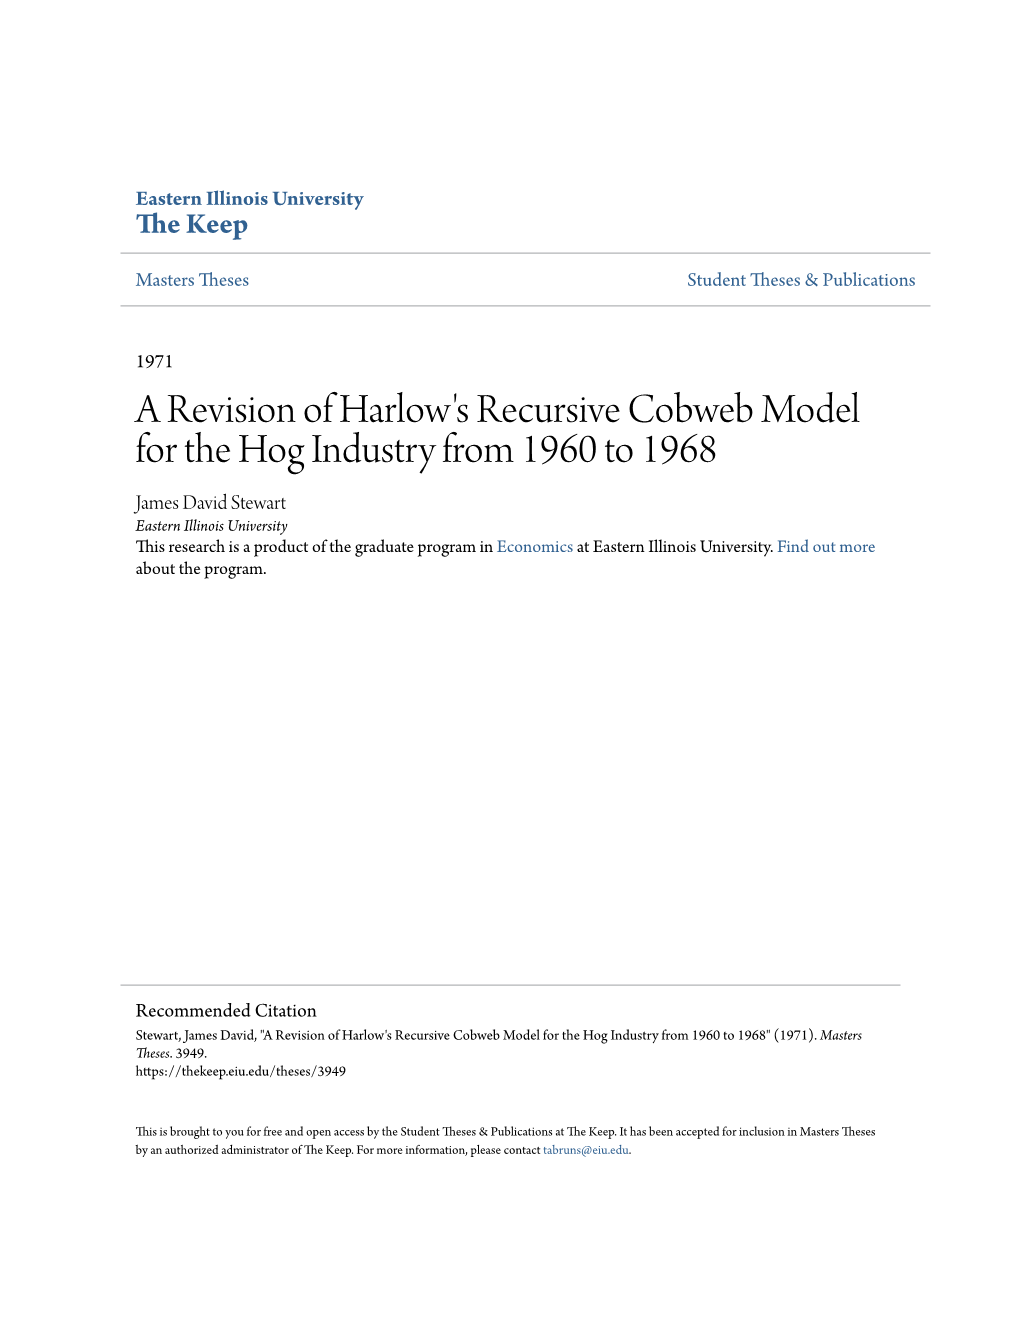 A Revision of Harlow's Recursive Cobweb Model for the Hog Industry from 1960 to 1968